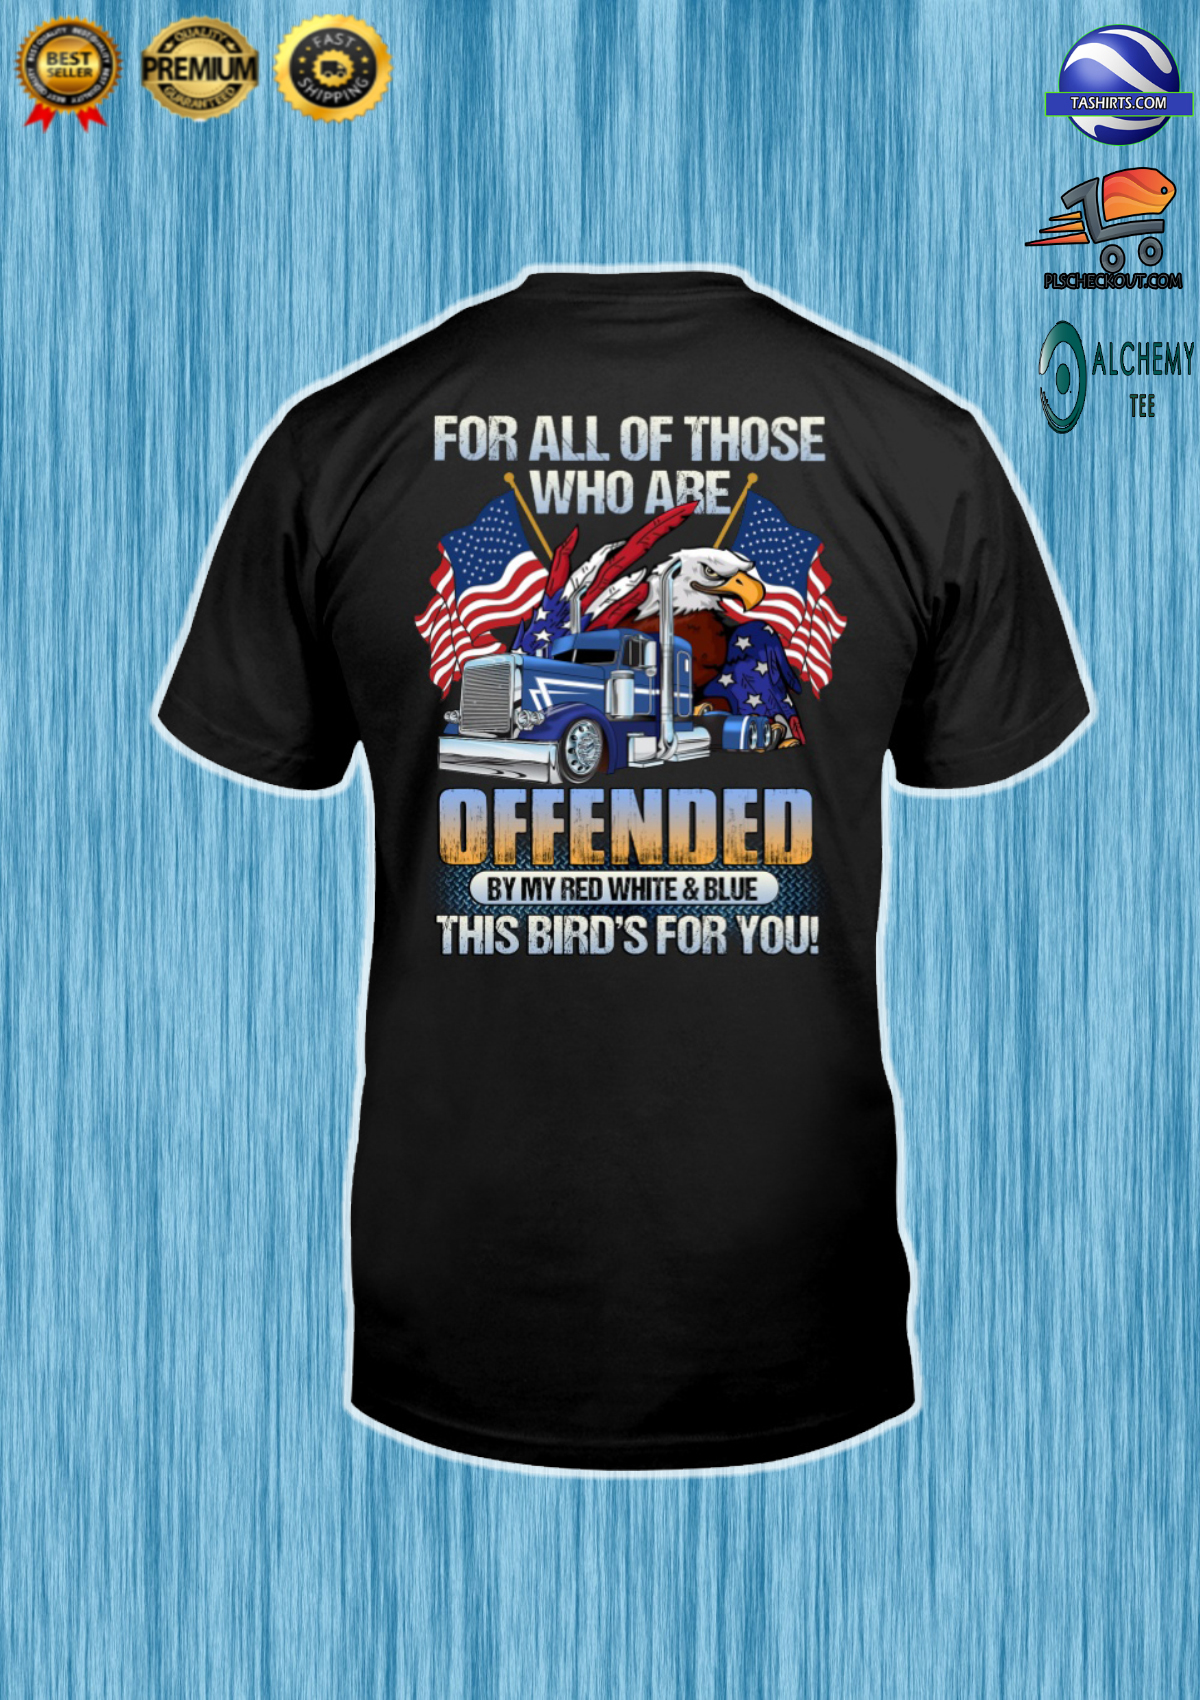 For all of those who are offended by my red with and blue this bird’s for you shirt